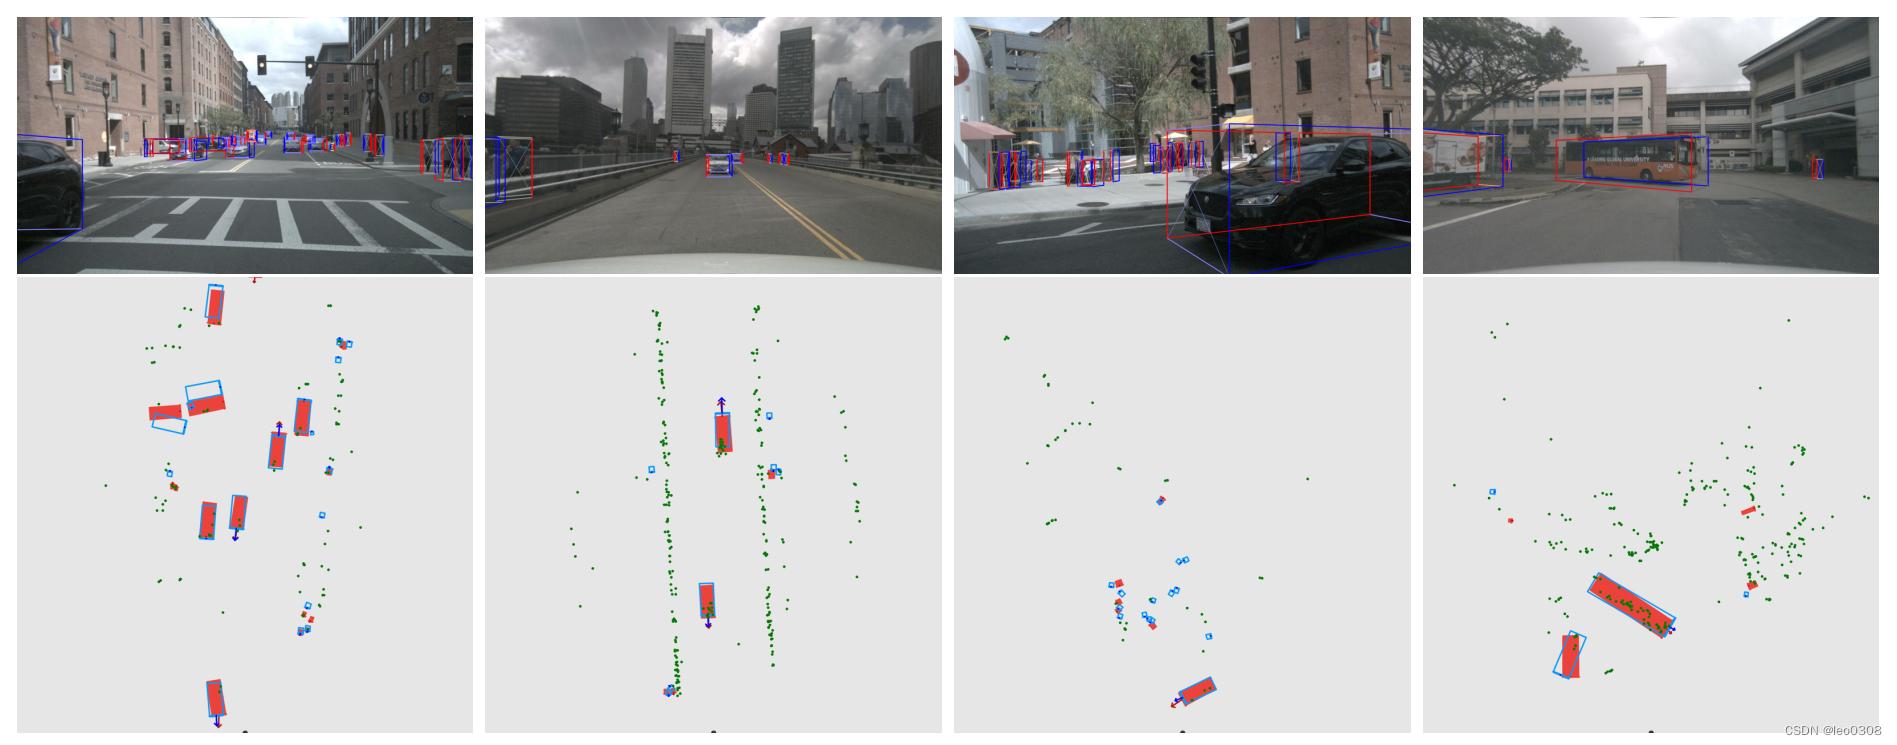 CenterFusion: Center-based Radar and Camera Fusion for 3D Object Detection 解读